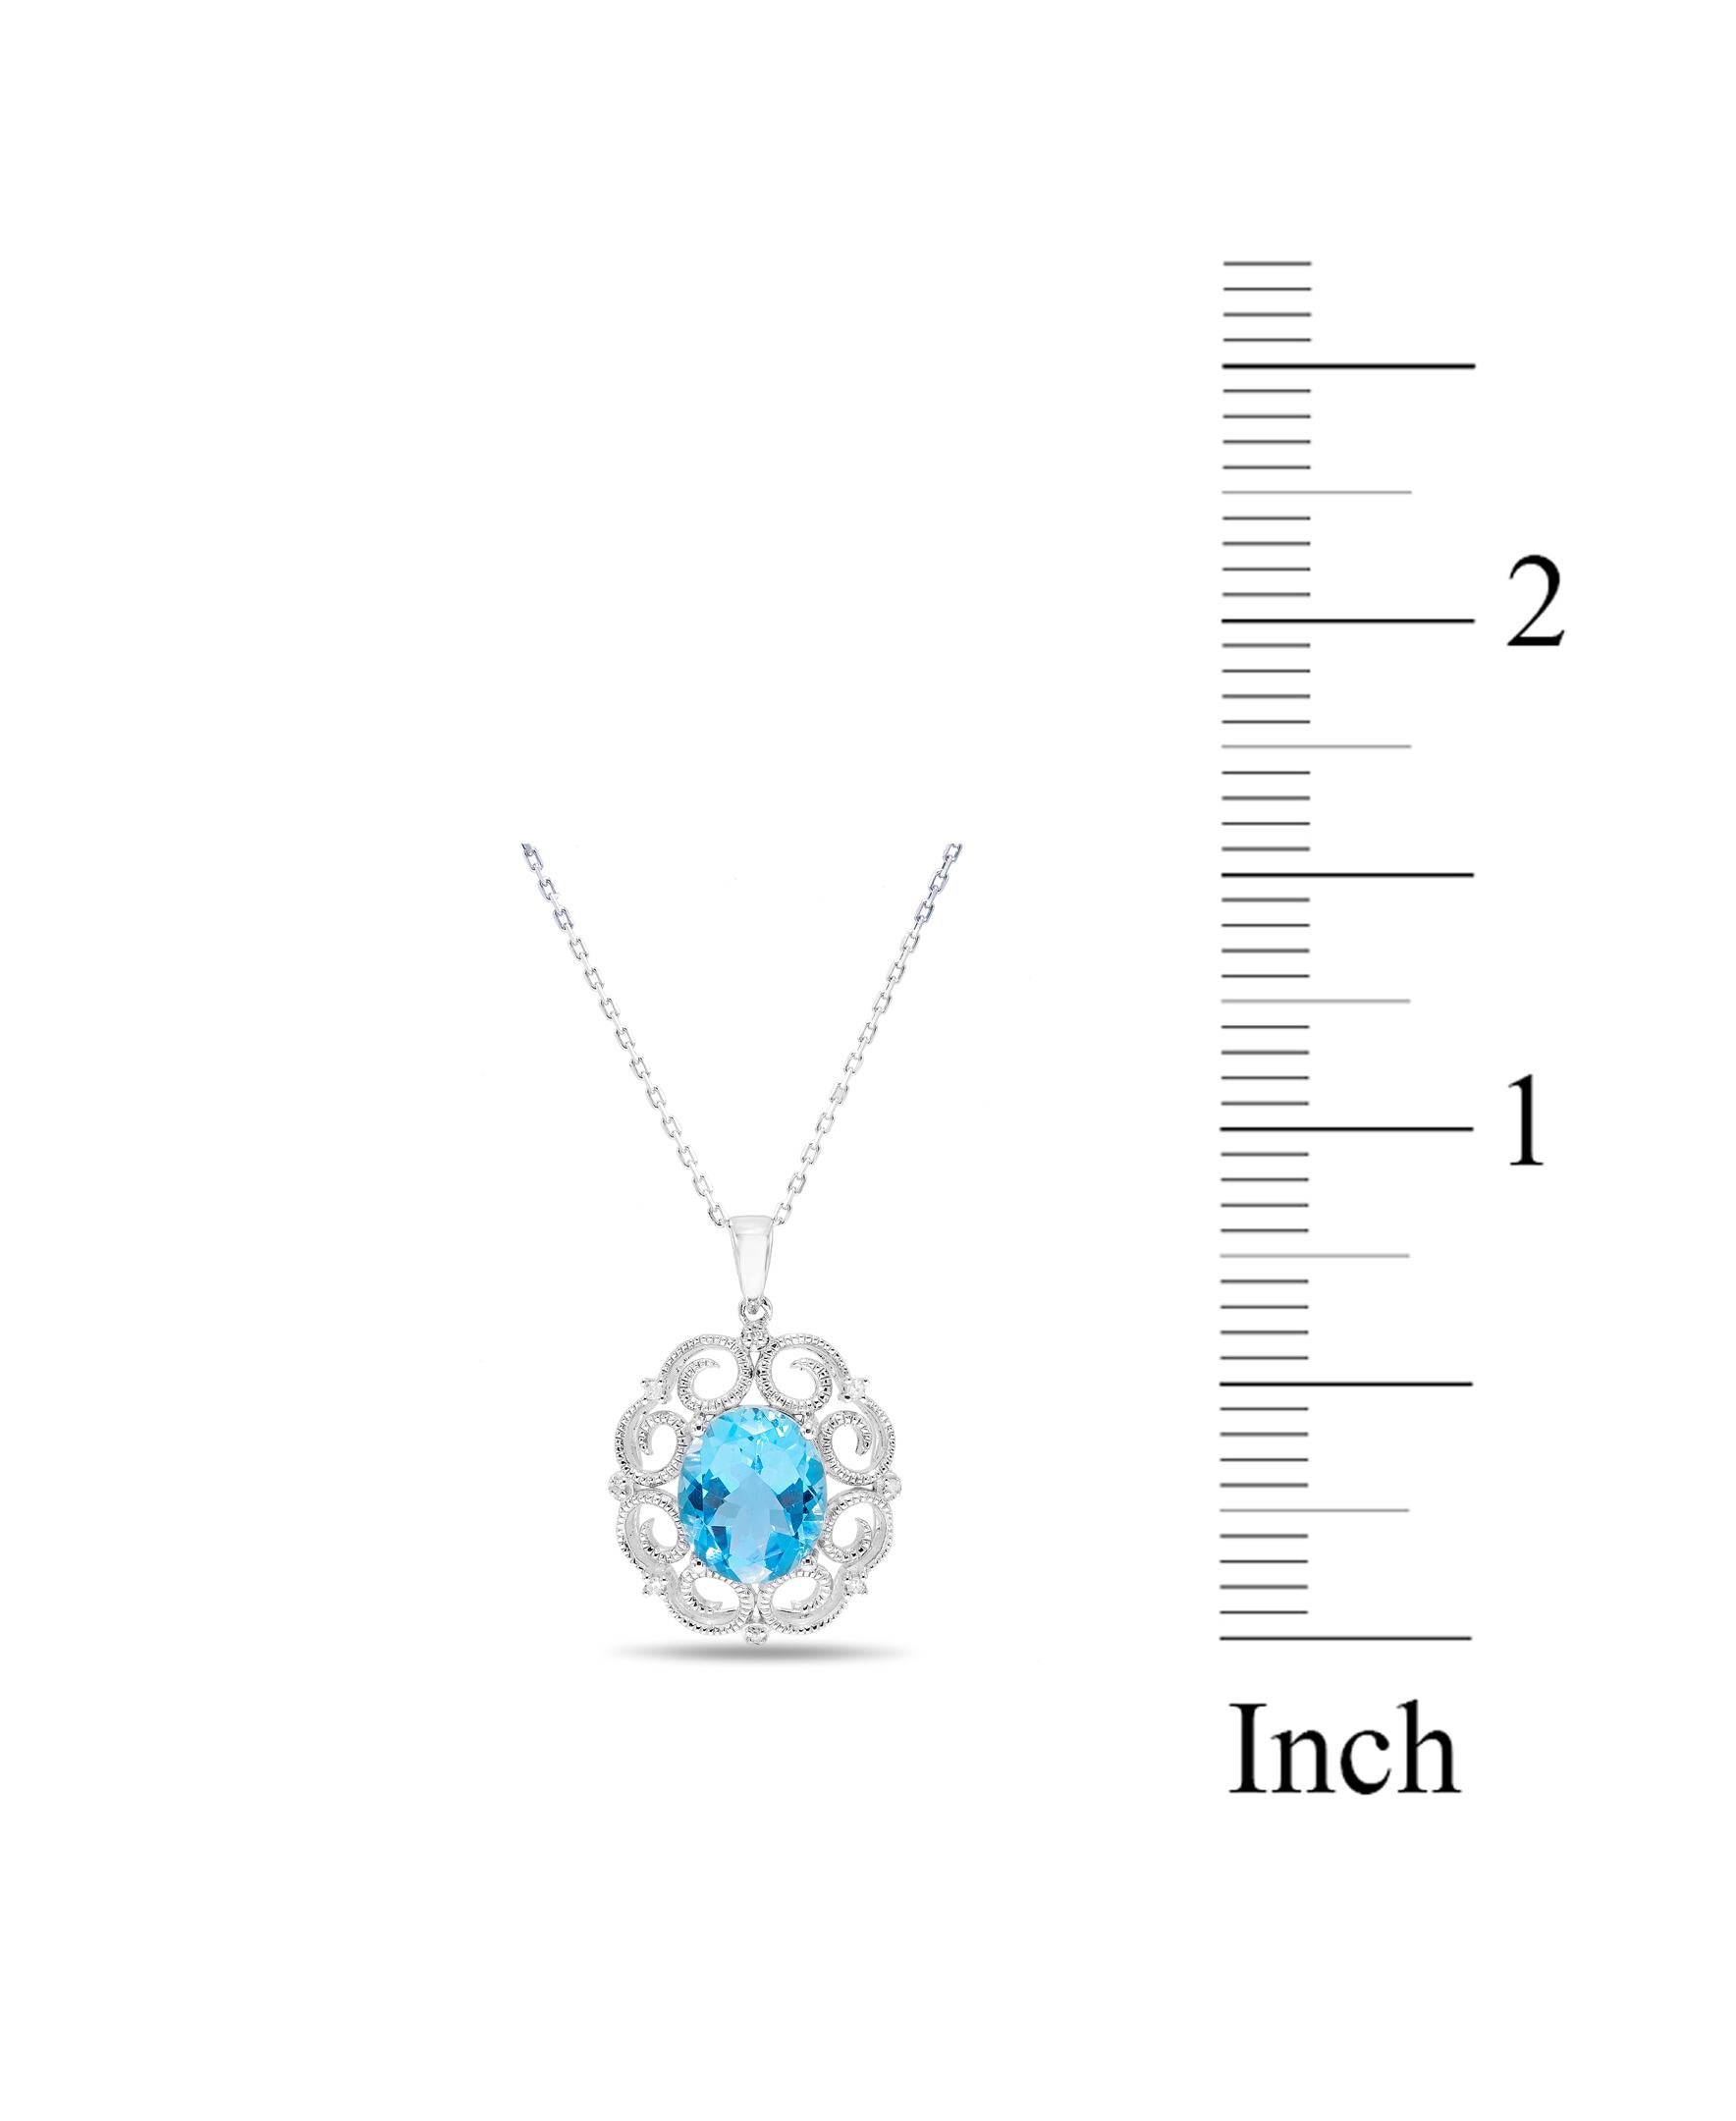 Oval Cut 5-1/2 ct. Swiss Blue Topaz and Diamond Accent Sterling Silver Pendant Necklace For Sale